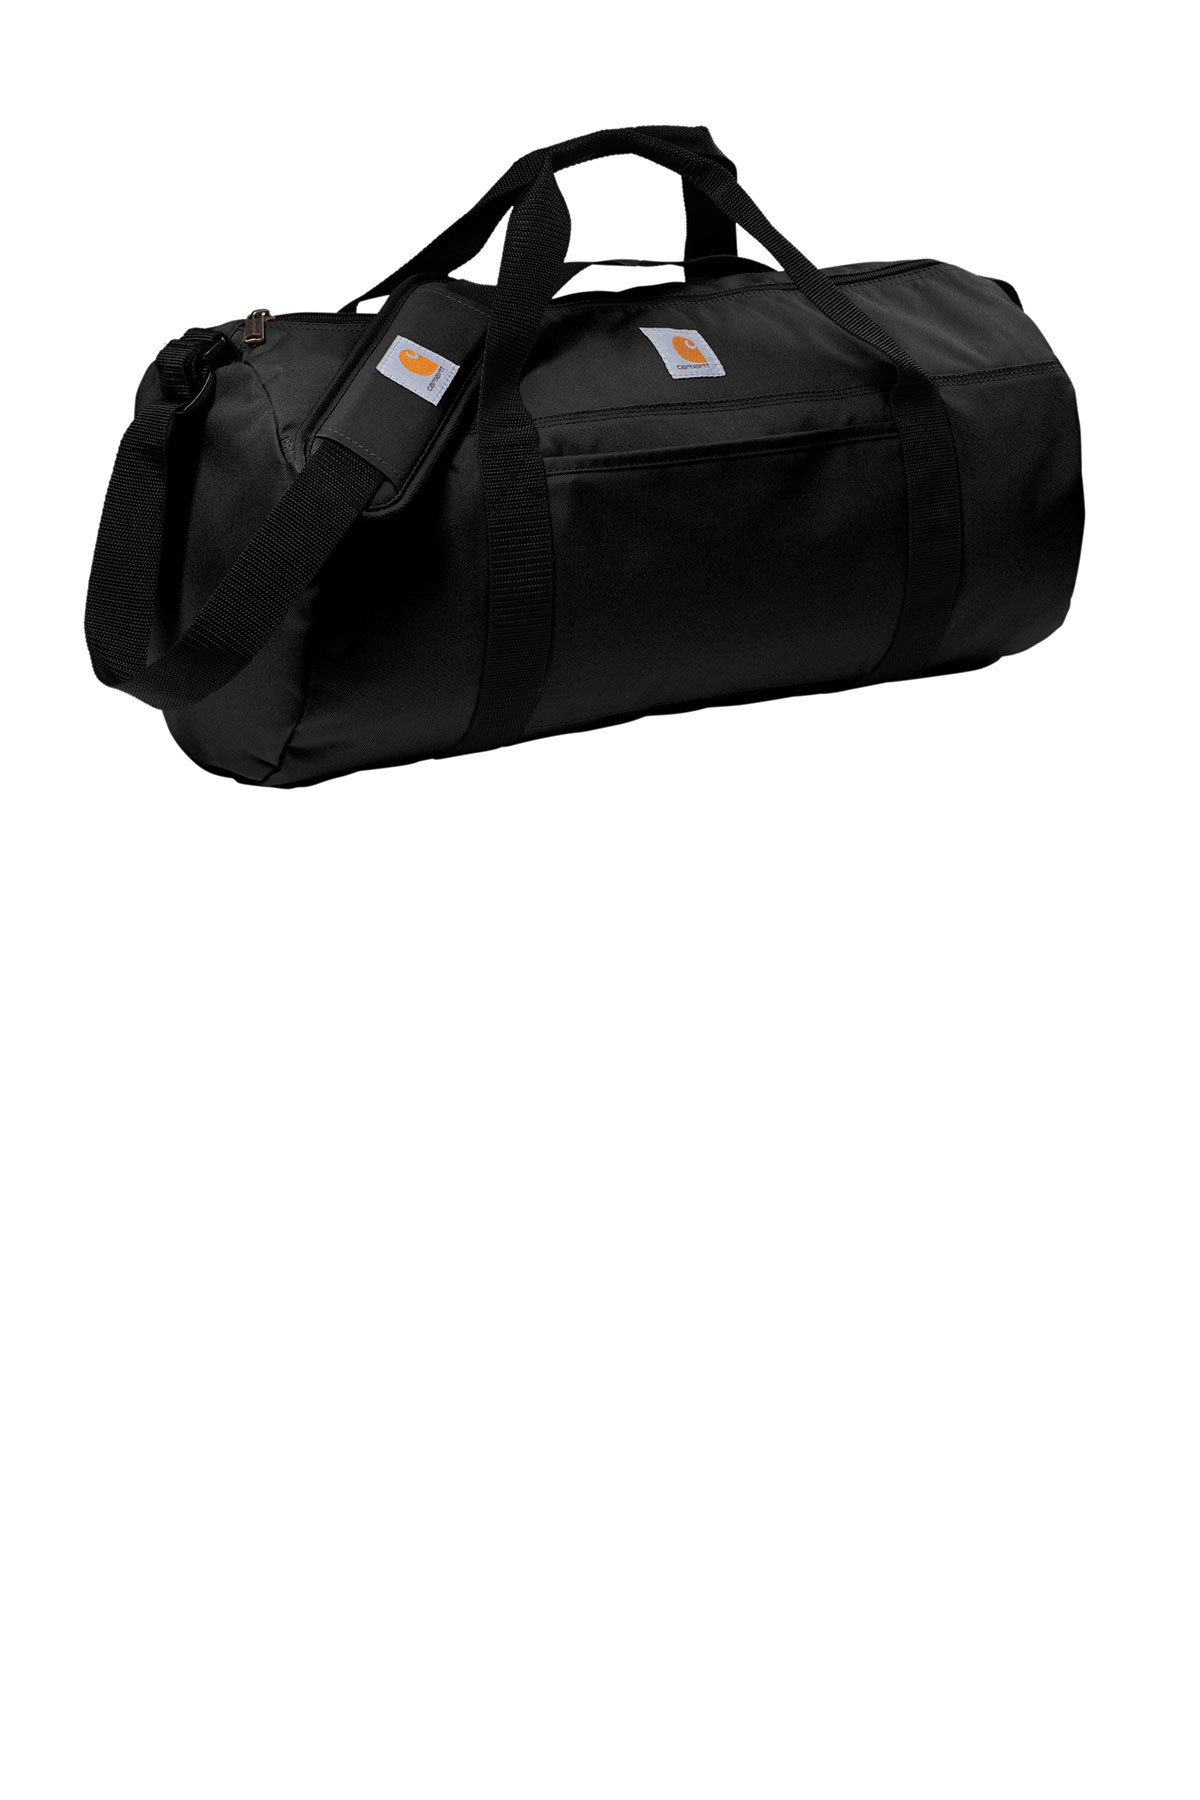 Carhartt Canvas Packable Duffel with Pouch | Product | SanMar